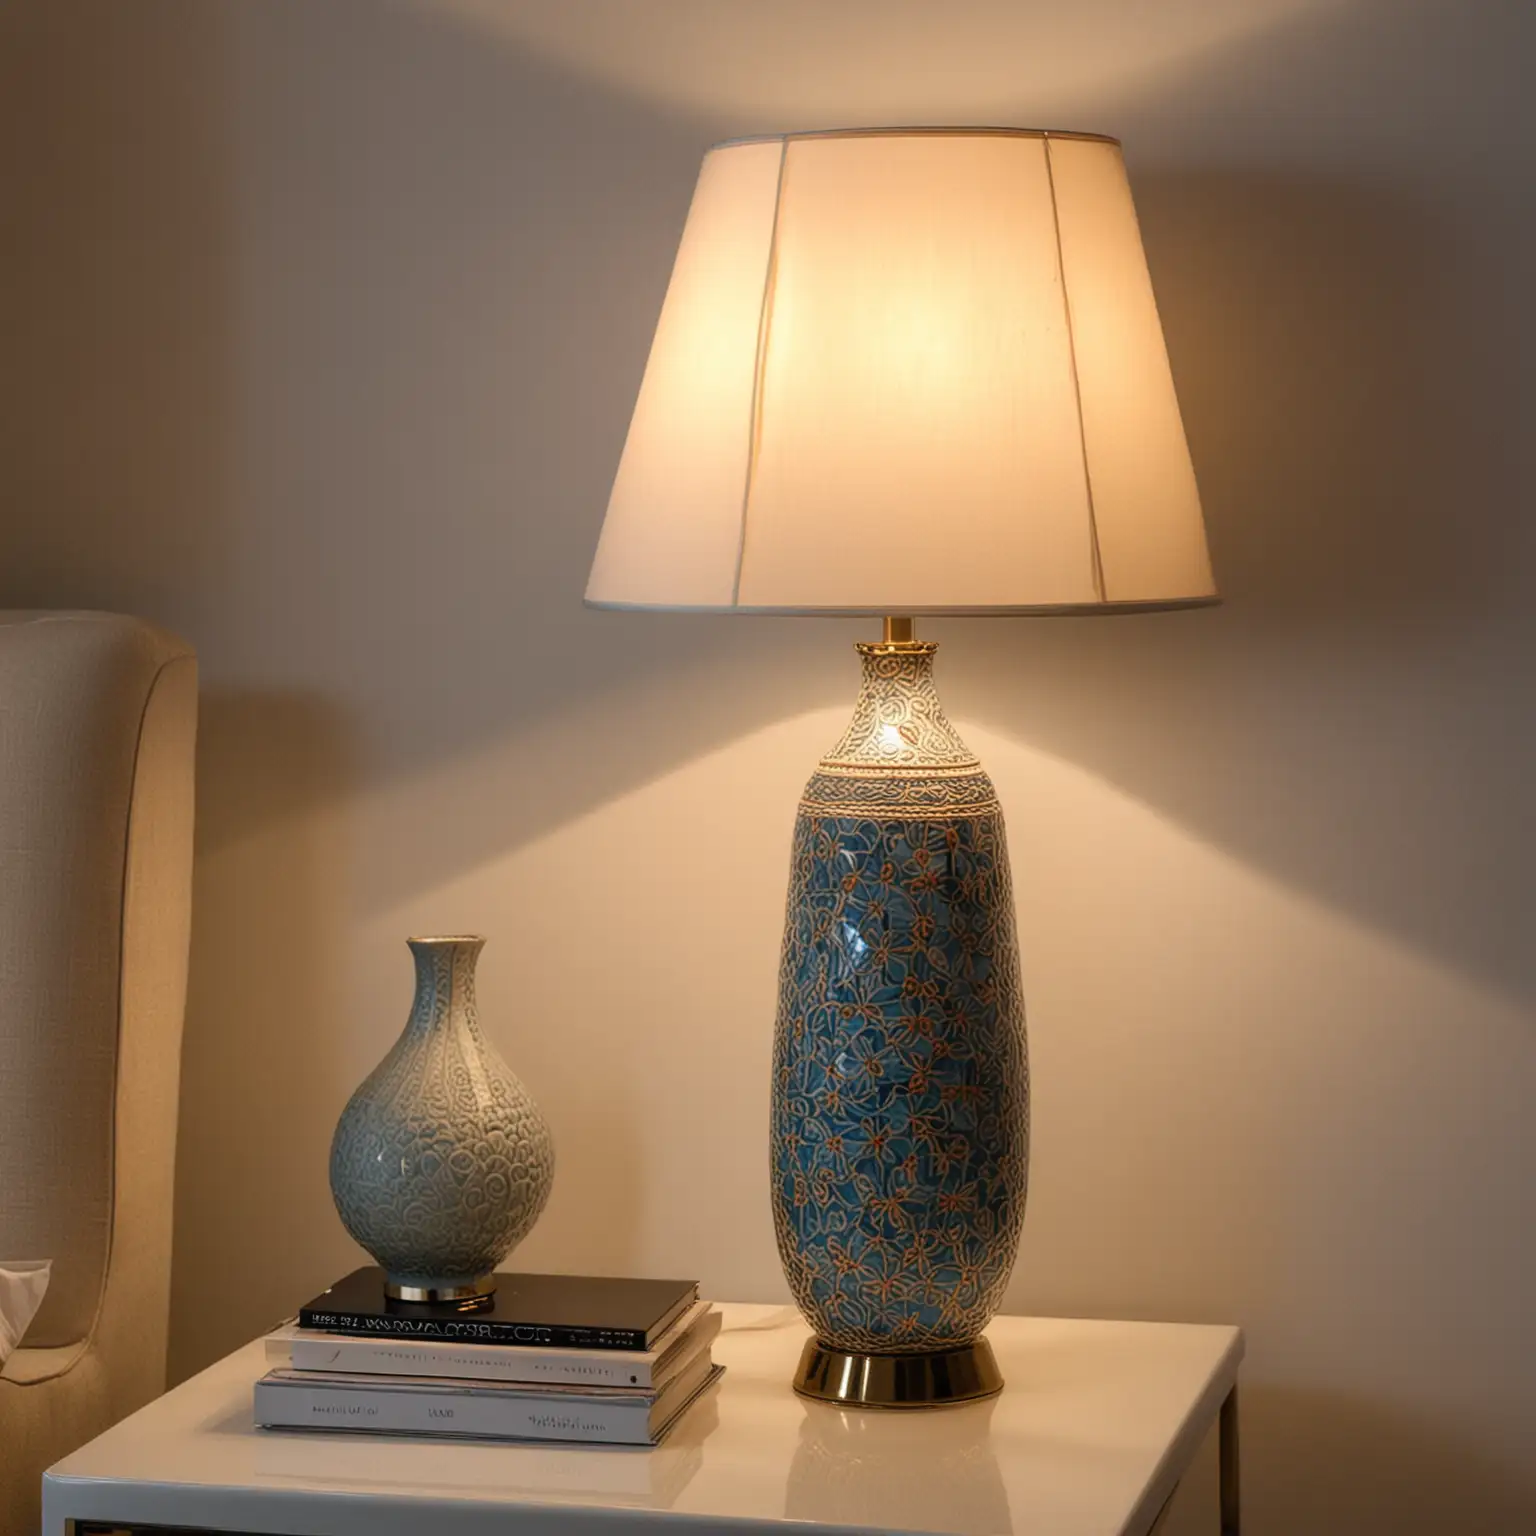 a luxury Villa in the Meditteranean Sea showing a close up of the luxury table lamp